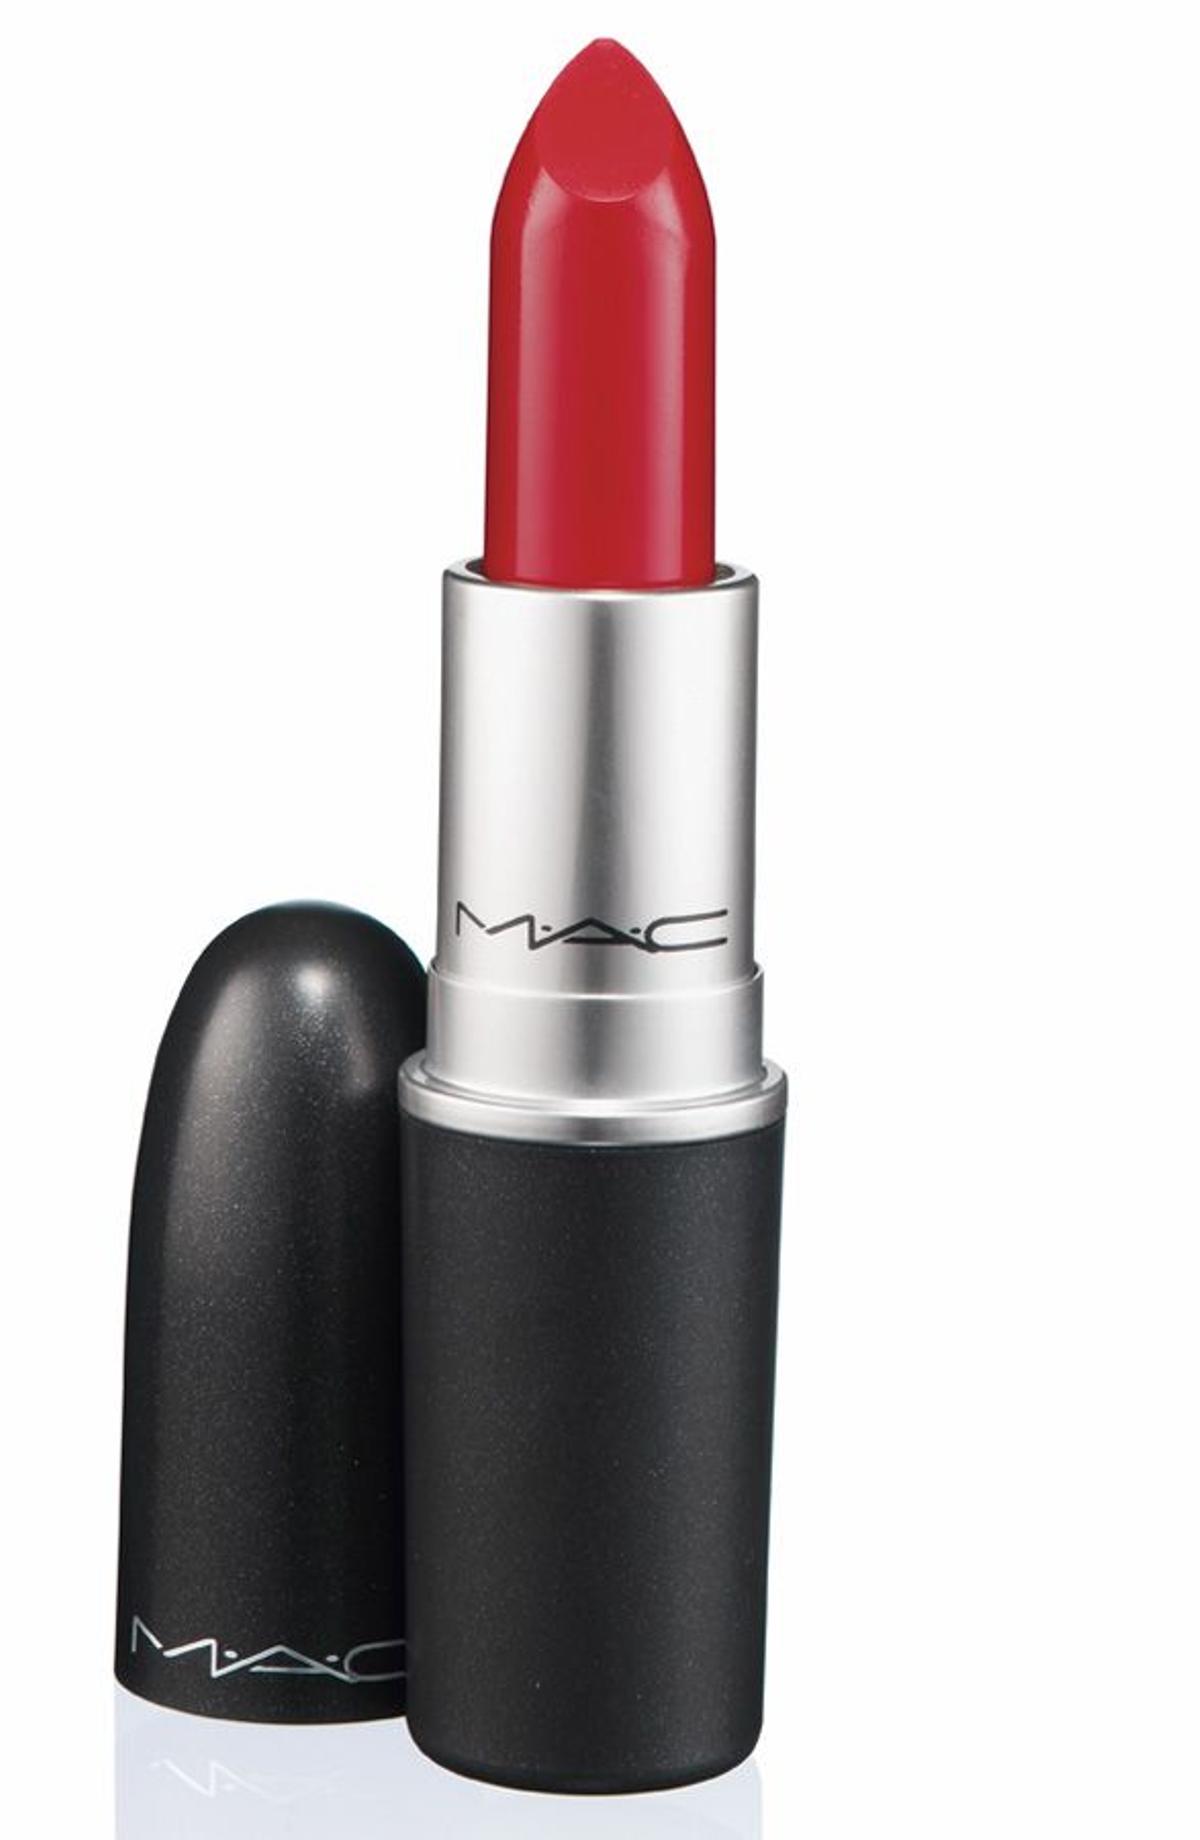 All Fired Up, M·A·C Lipstick